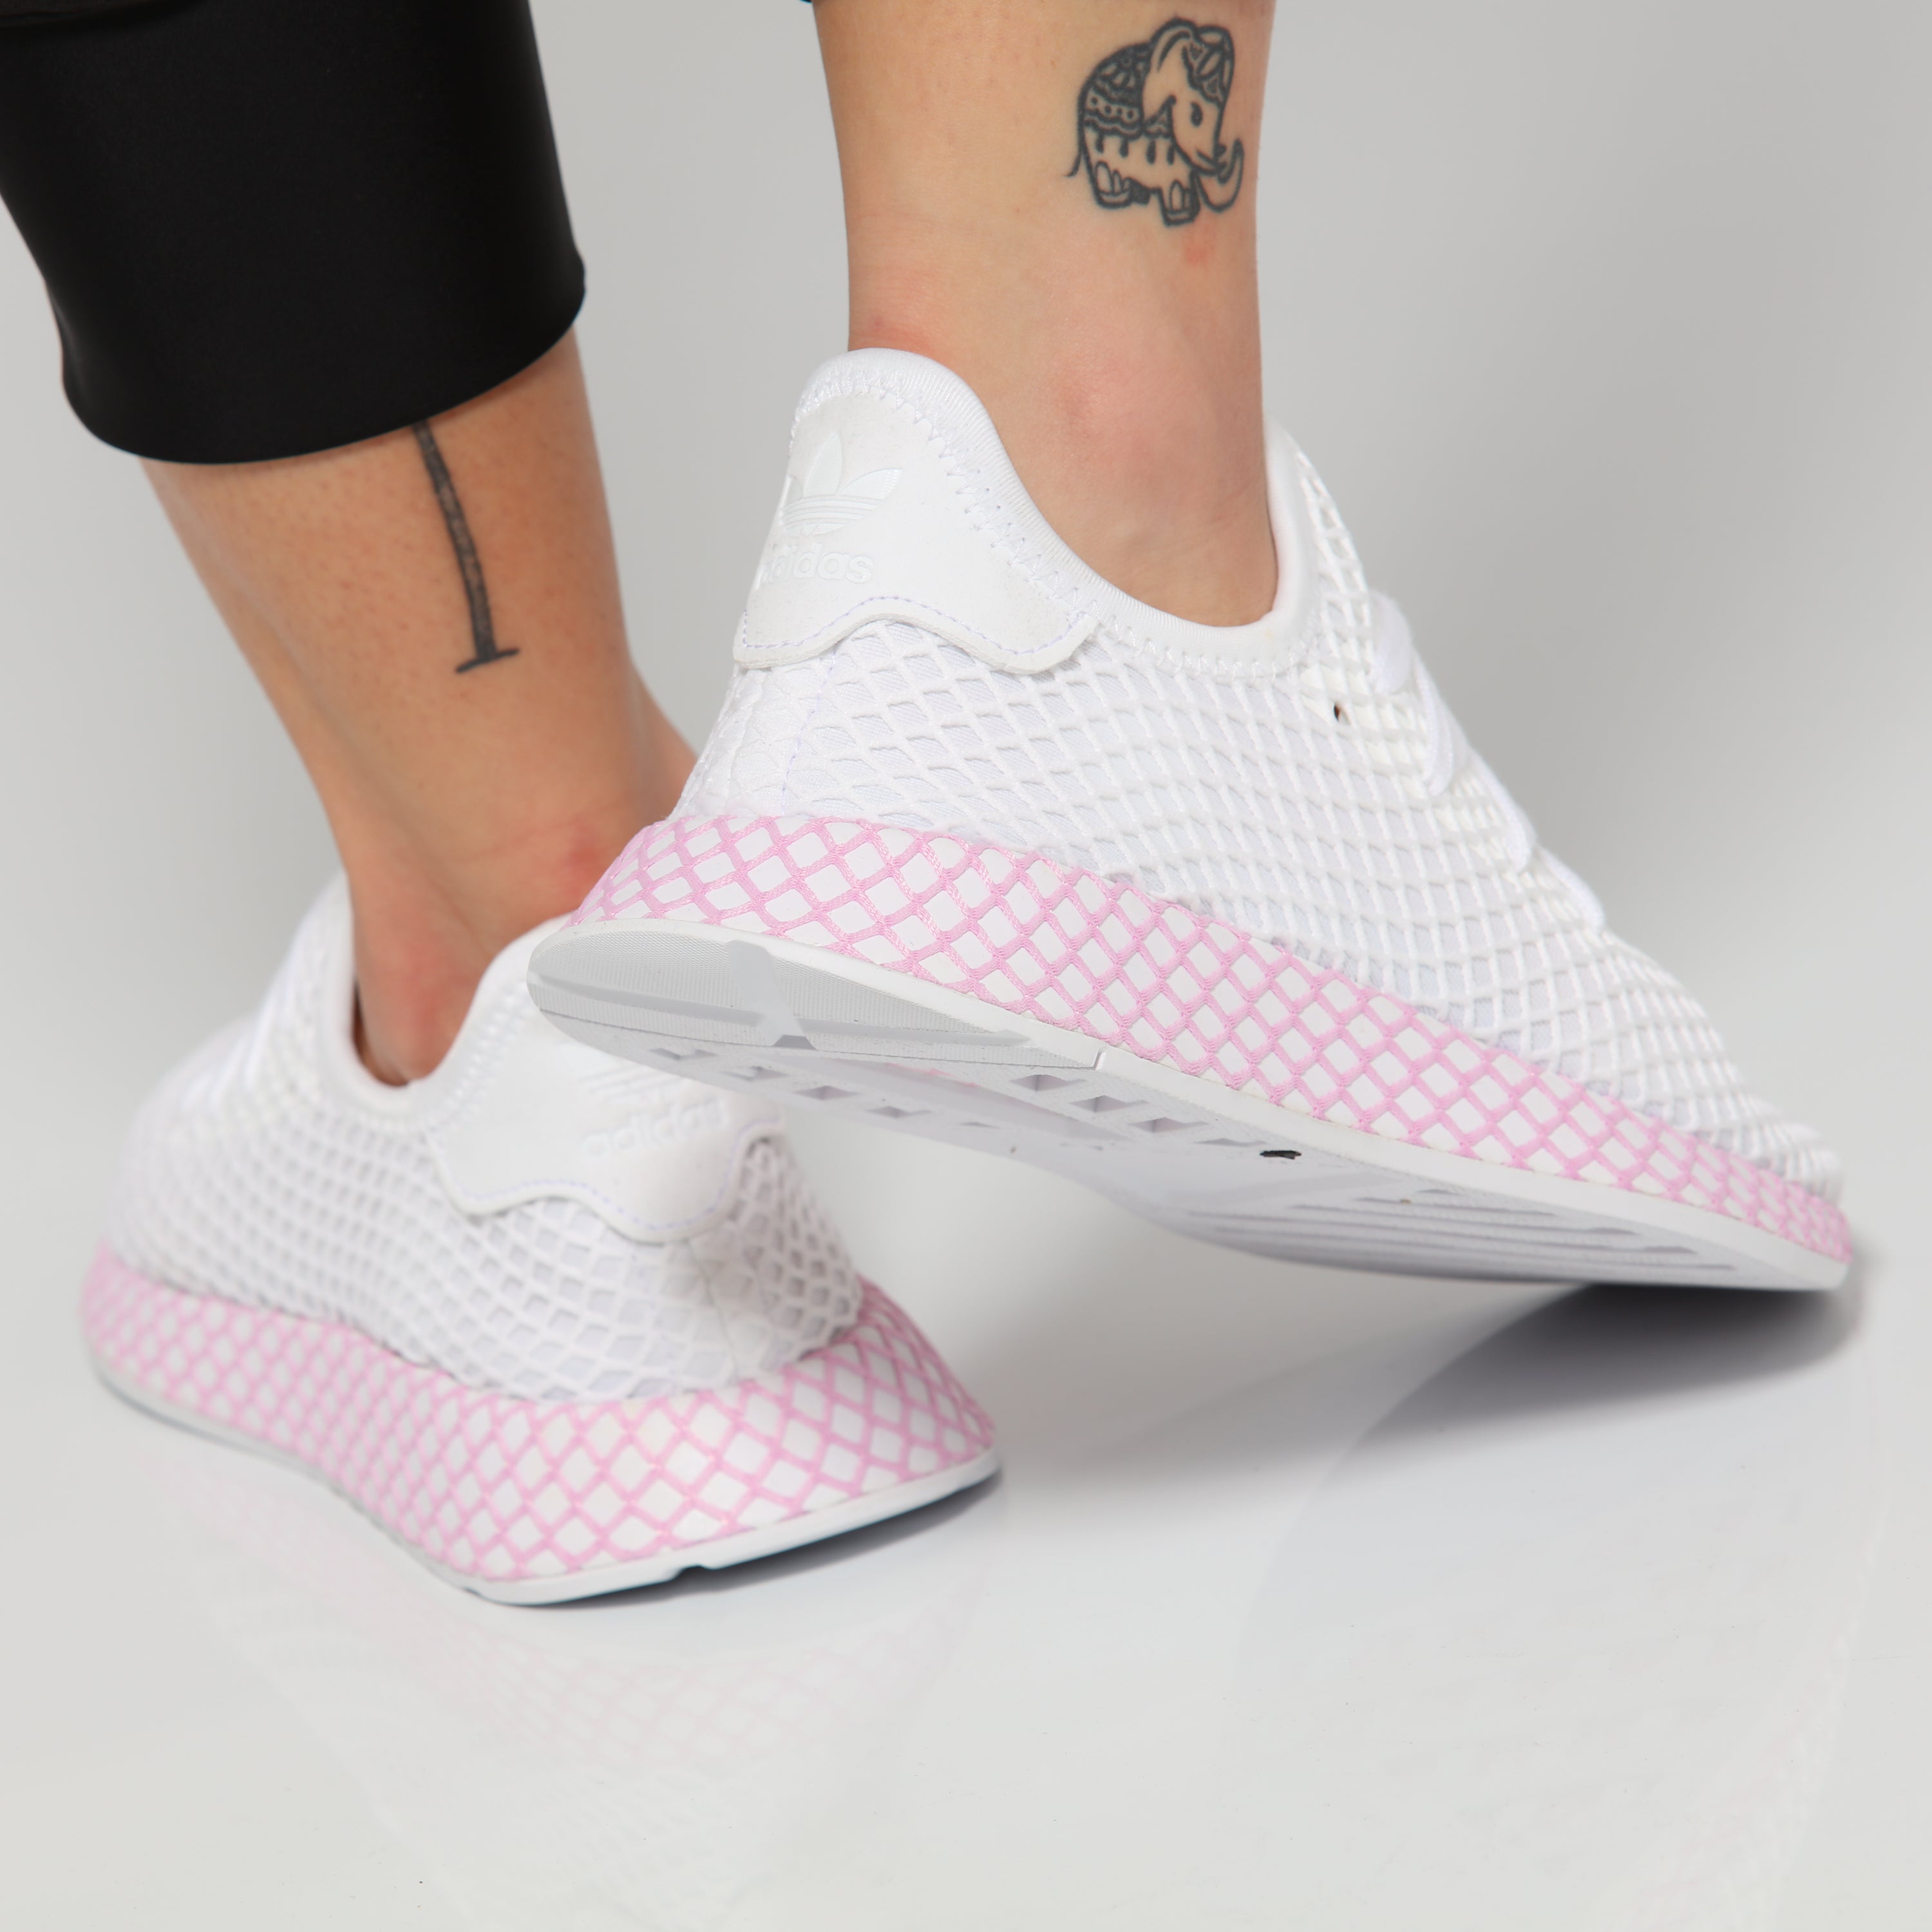 deerupt pink and white